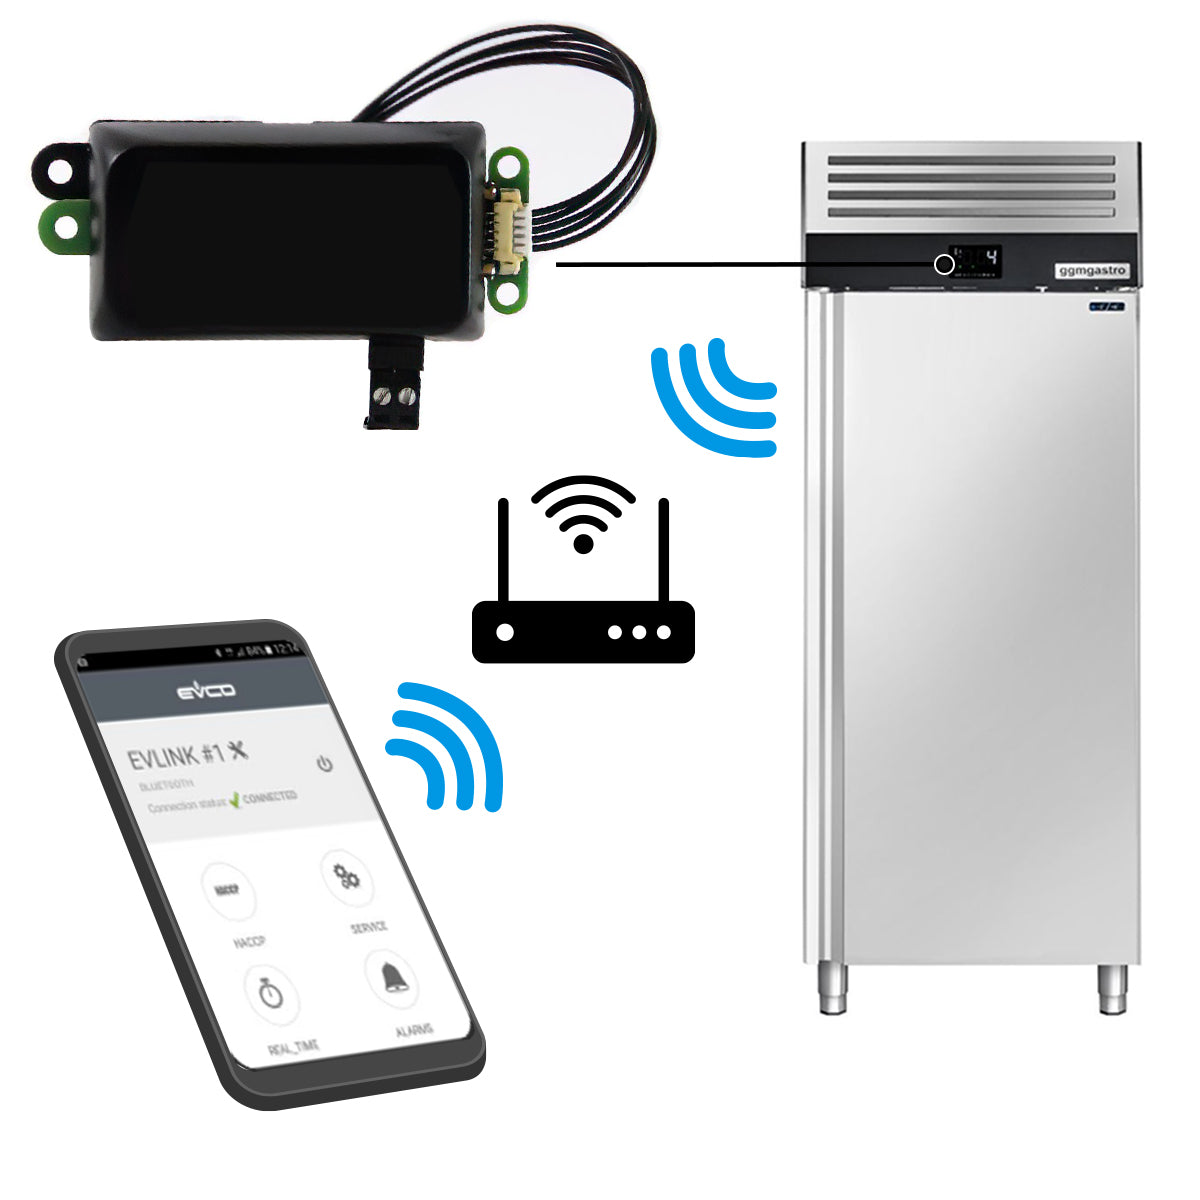 Wi-Fi control for refrigerators and freezers